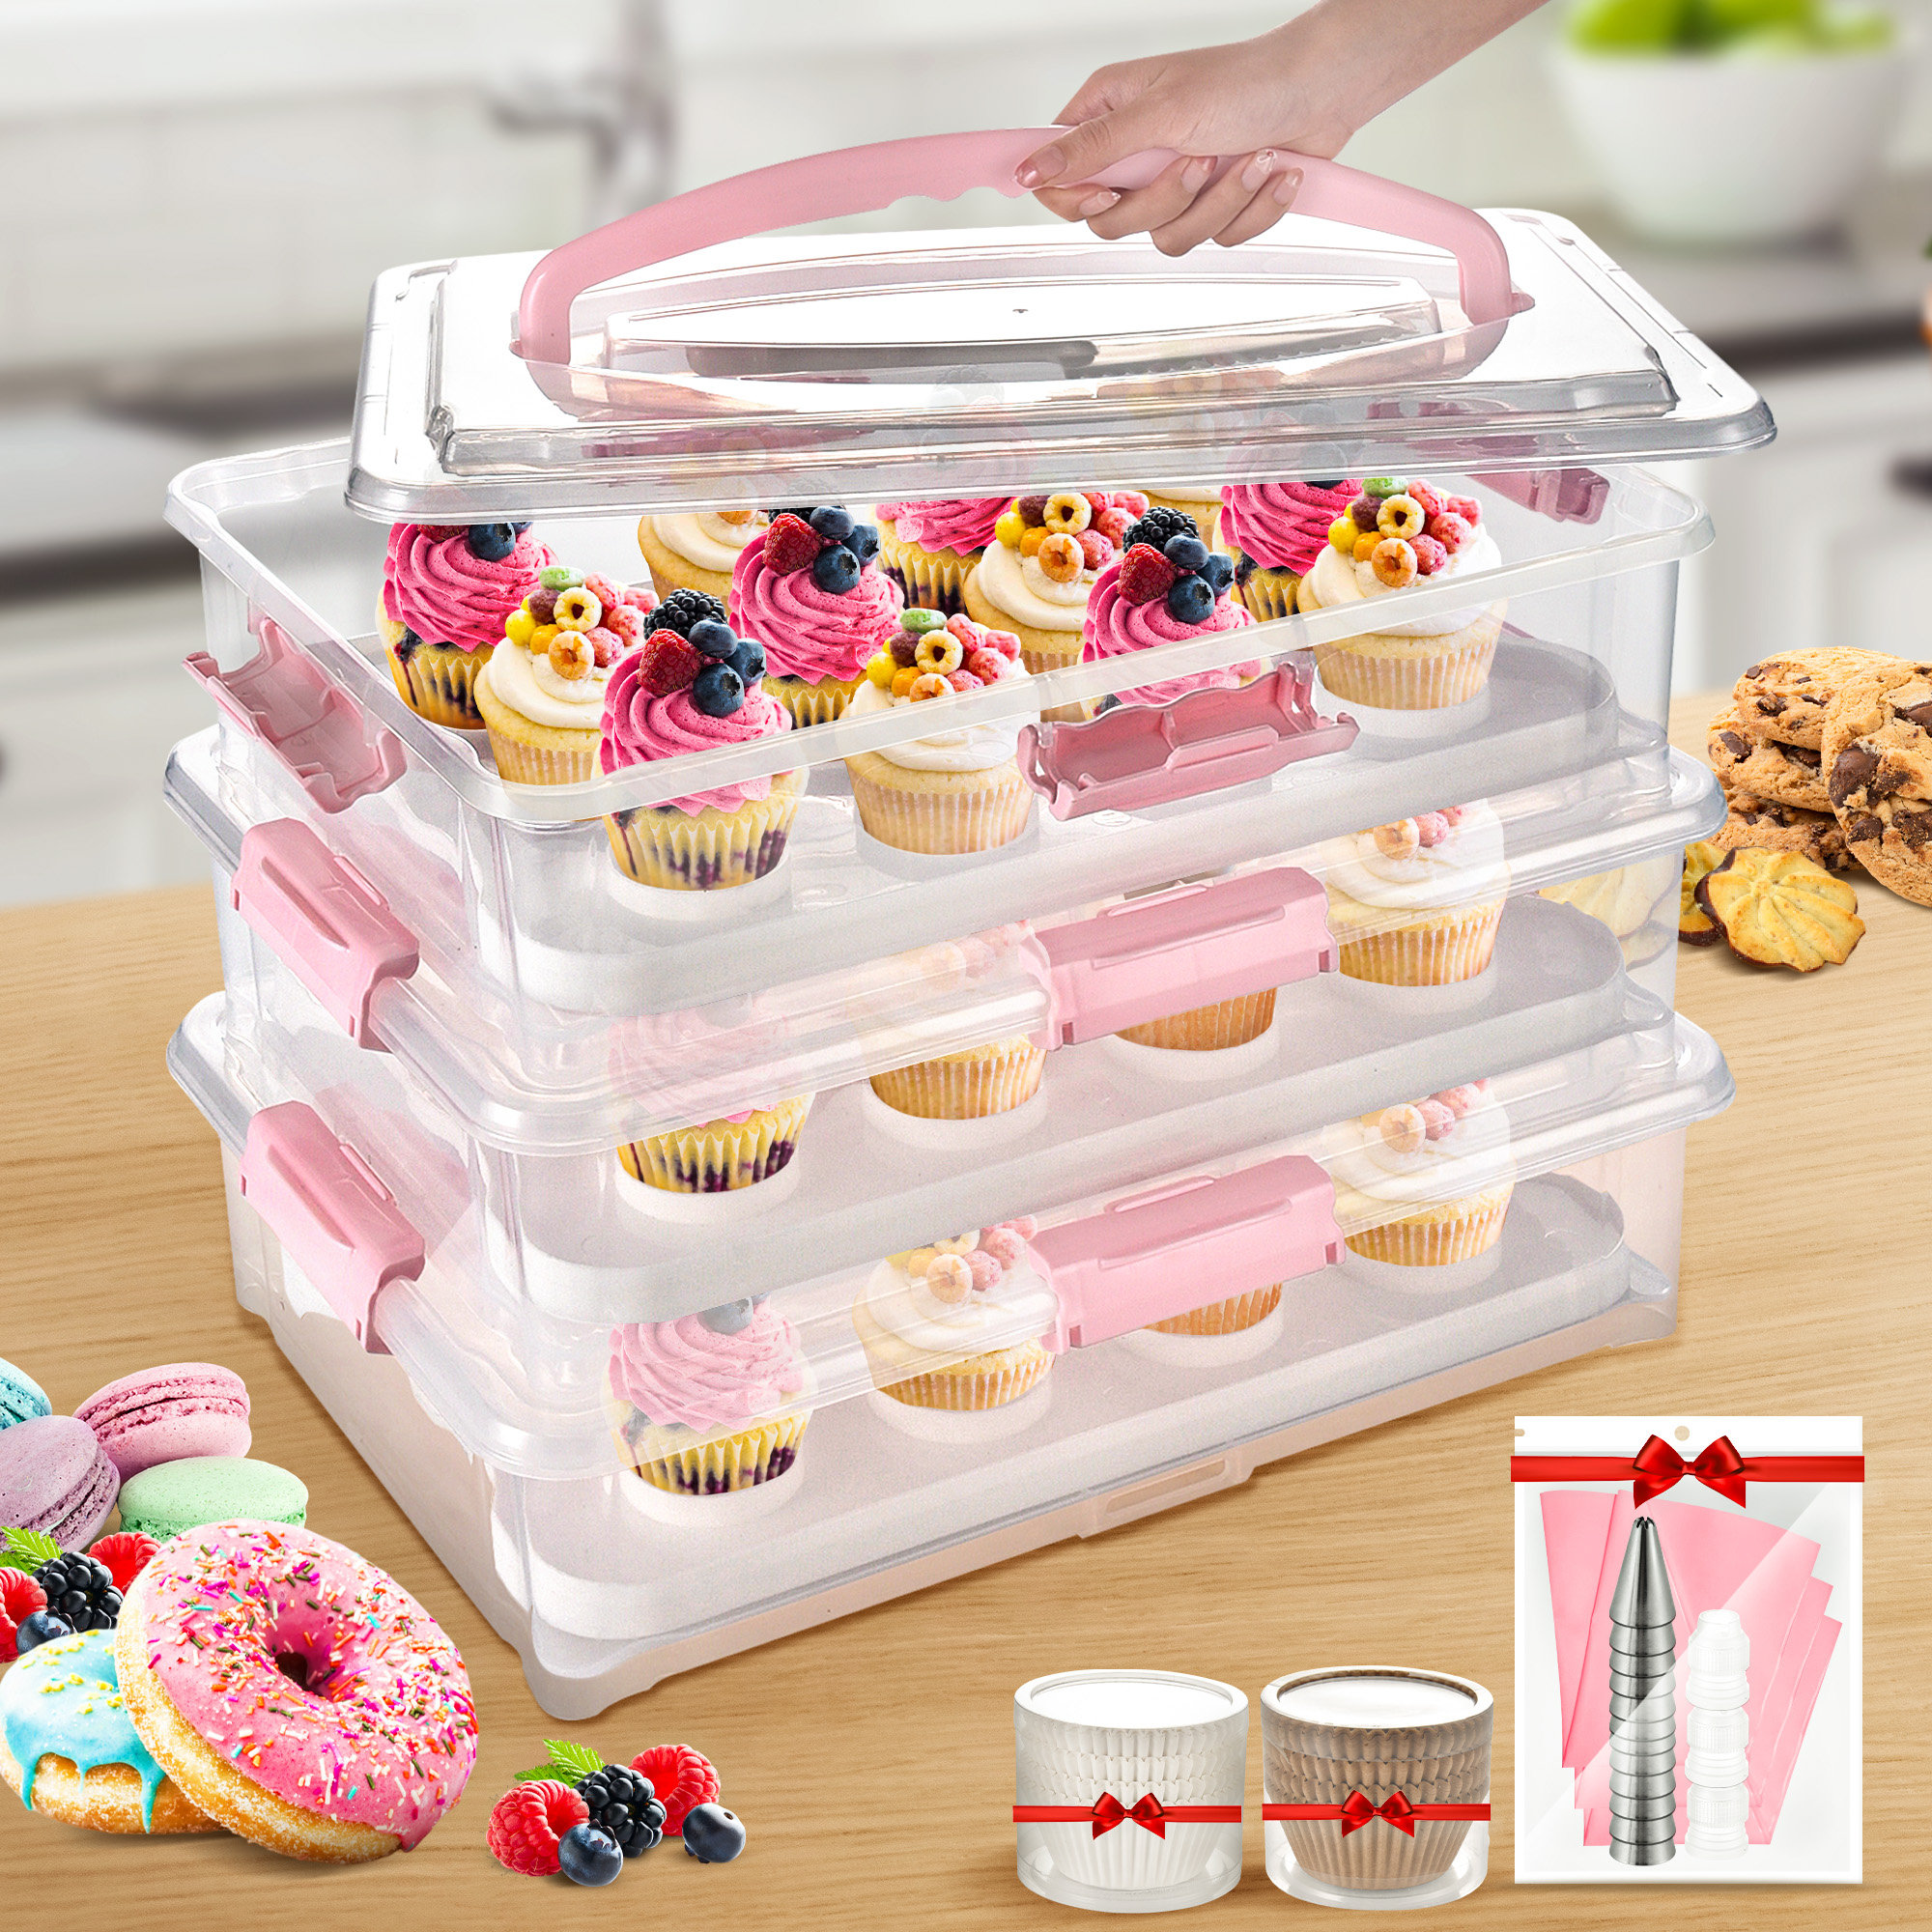 Knoxville 3-tiers Cupcake Carrier (White), Transport Container, BPA-Free,  Holds up to 36 Cupcakes